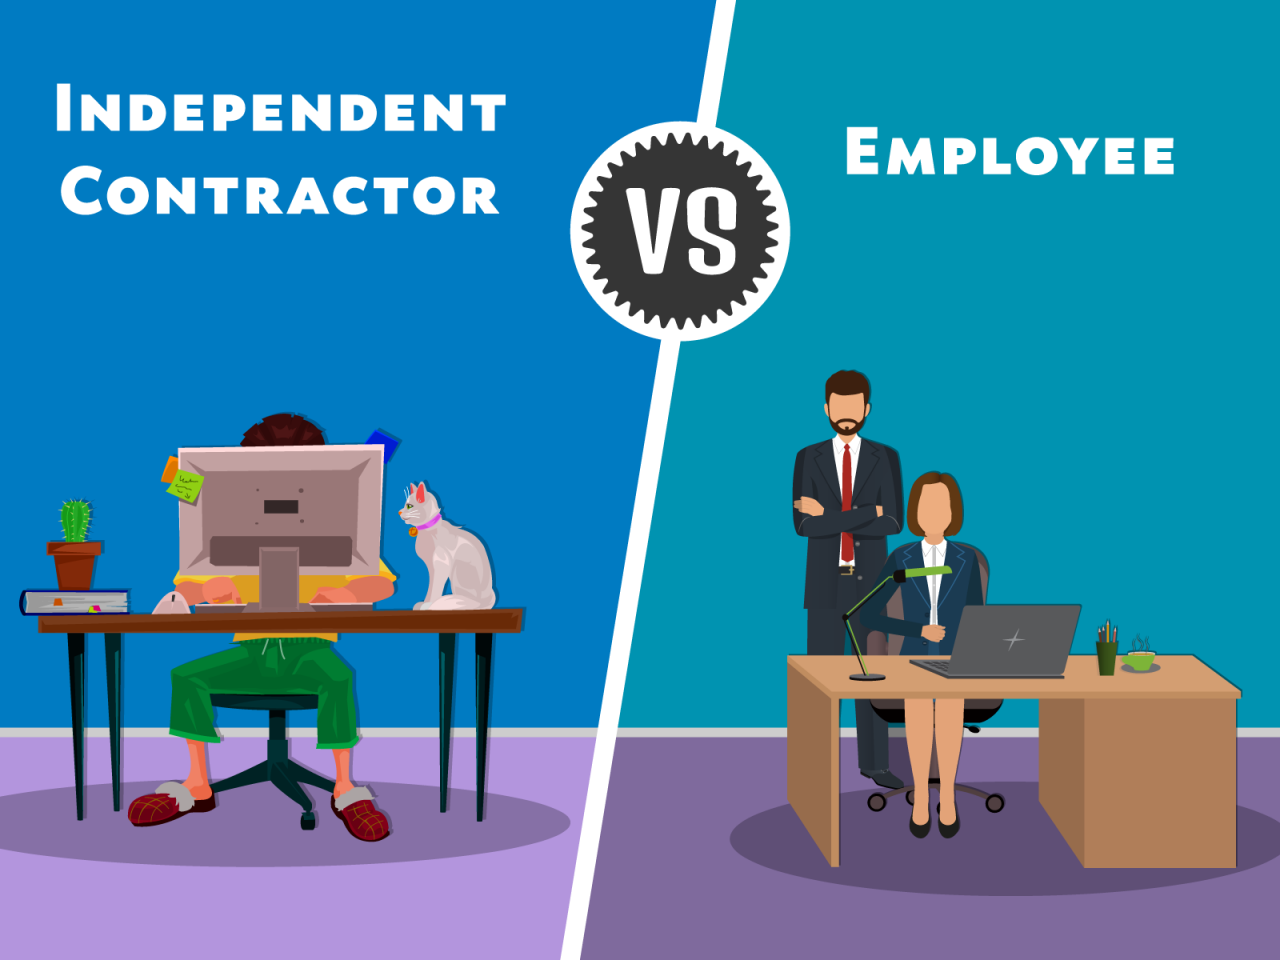 Can an employee also work as an independent contractor